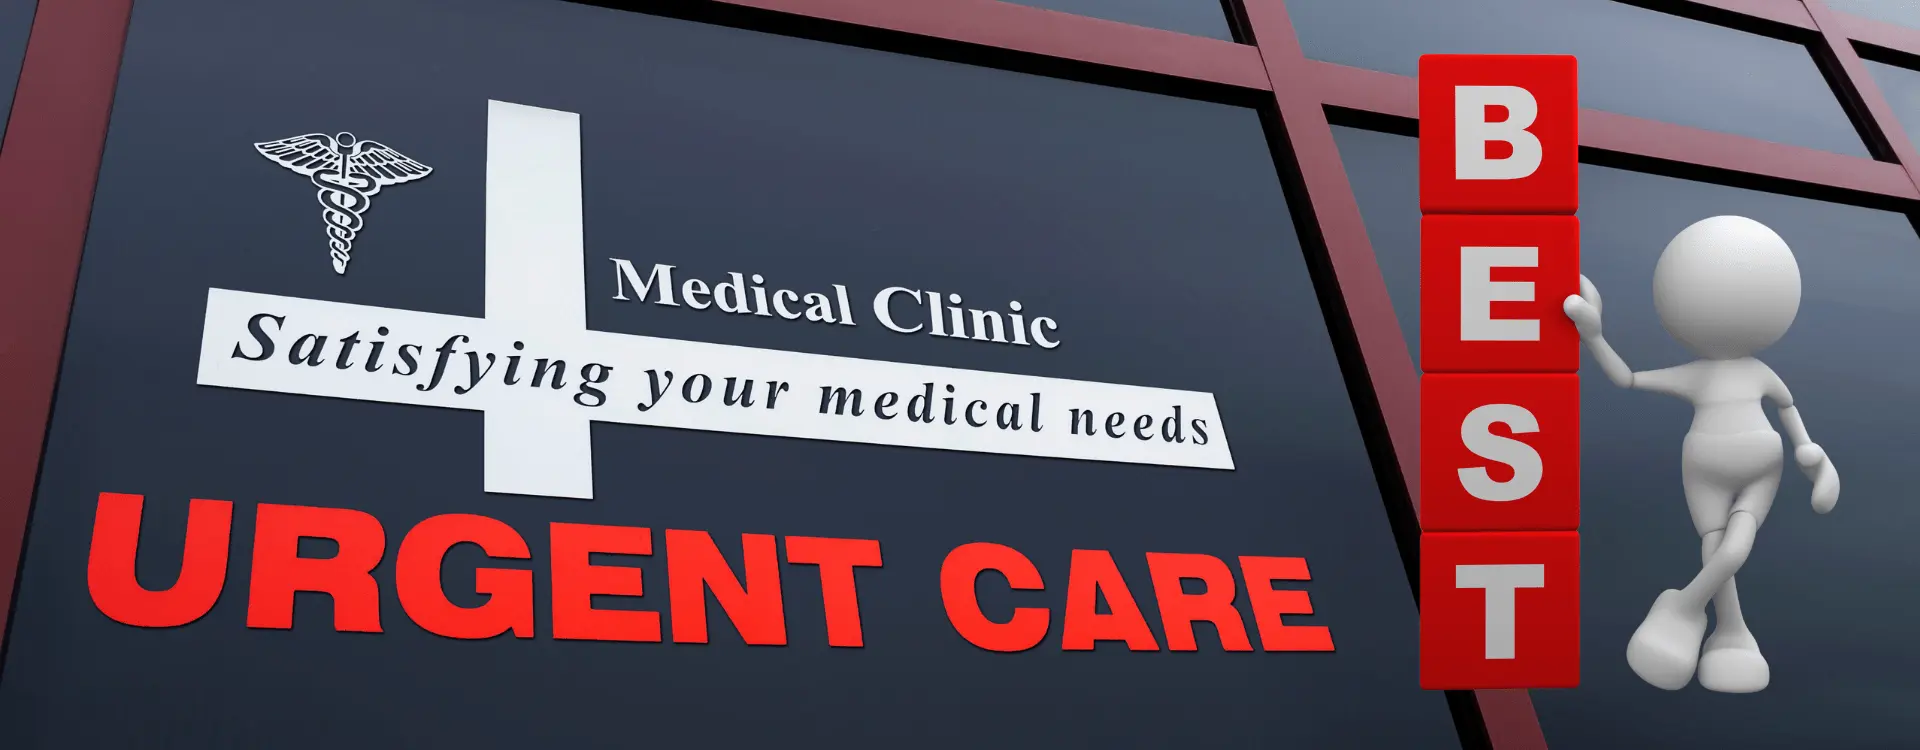 best urgent care centers in bakersfield